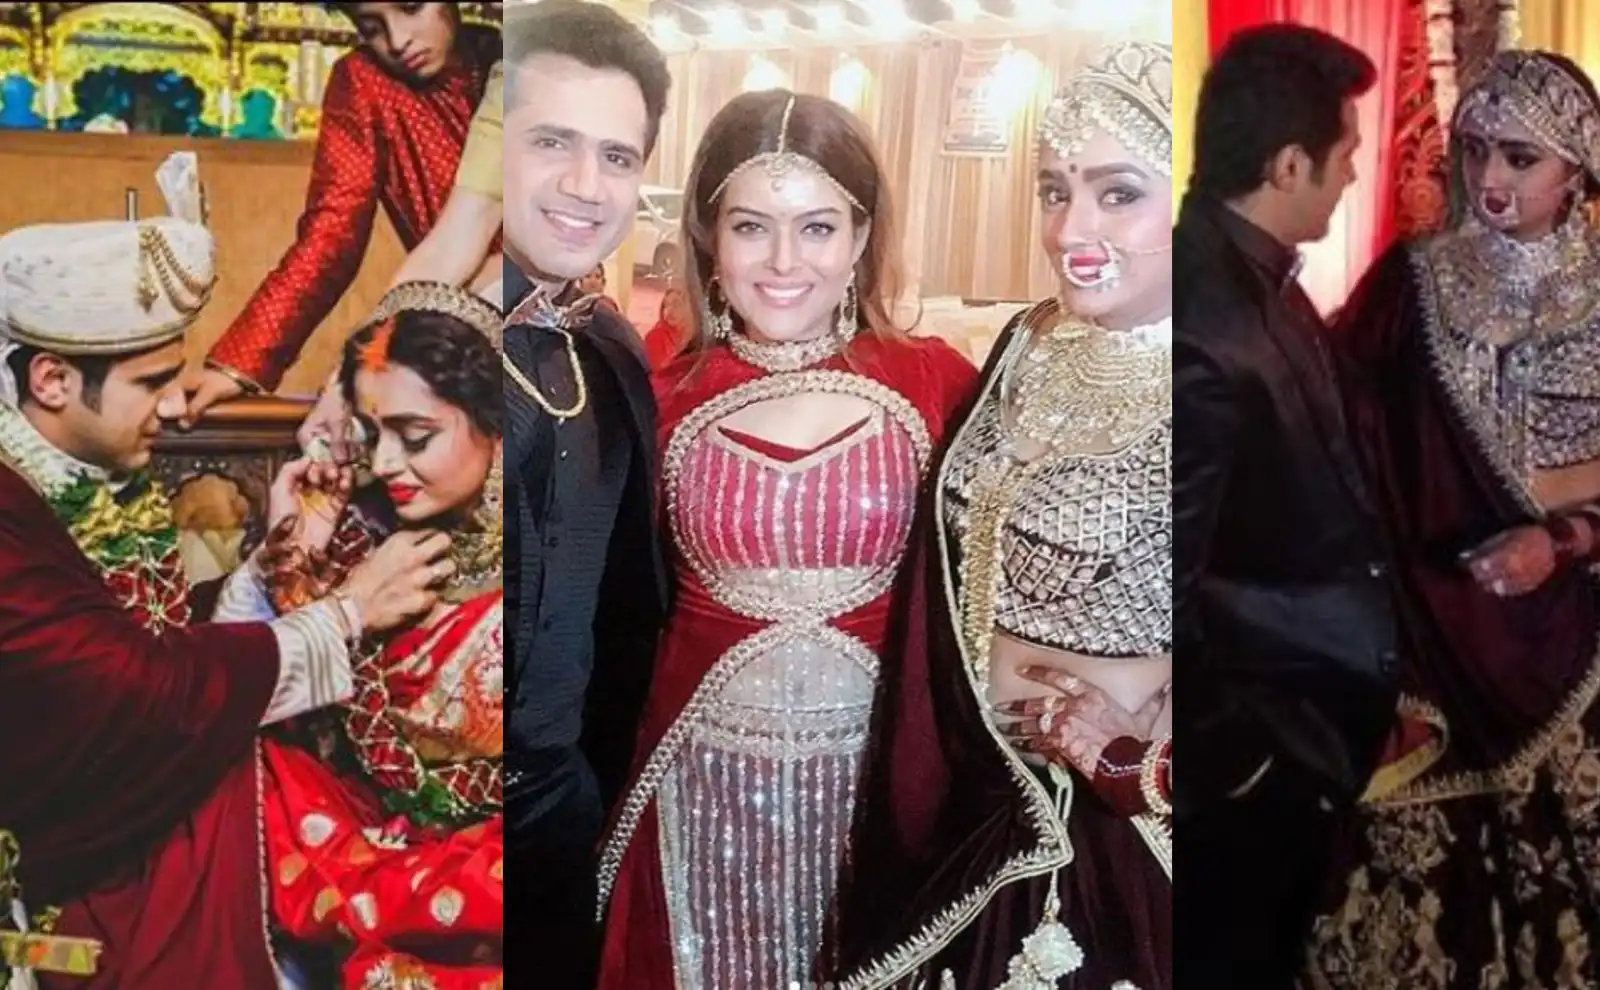 Check Out The Unseen Pictures From Parul Chauhan And Chirag Thakkar's Reception And Marriage Ceremony!